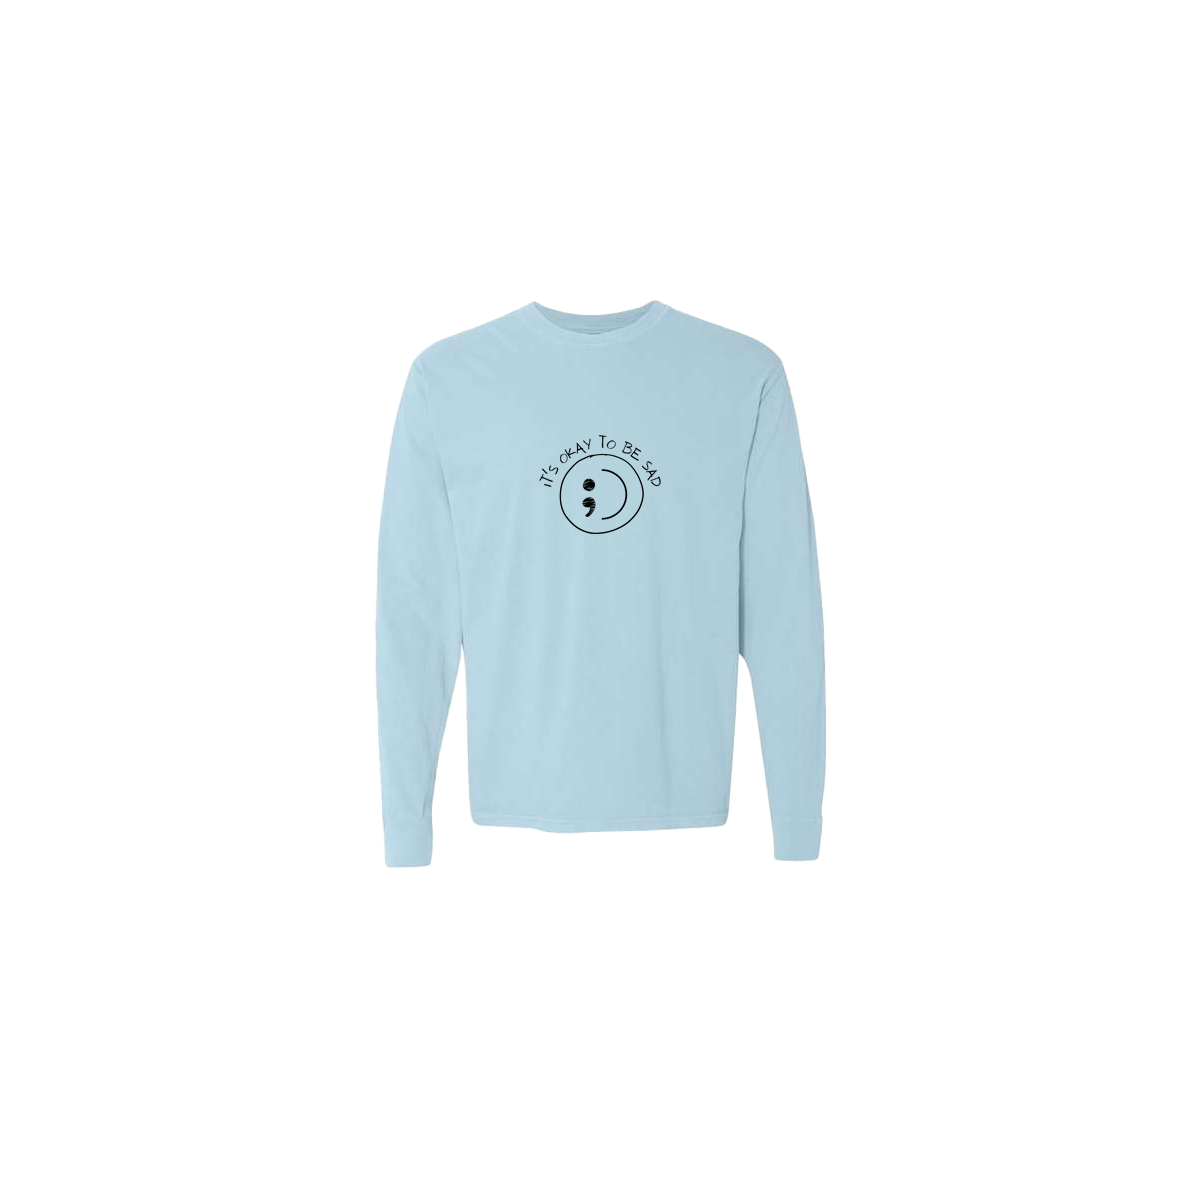 It's Okay to be Sad Embroidered Light Blue Long Sleeve Tshirt - Mental Health Awareness Clothing